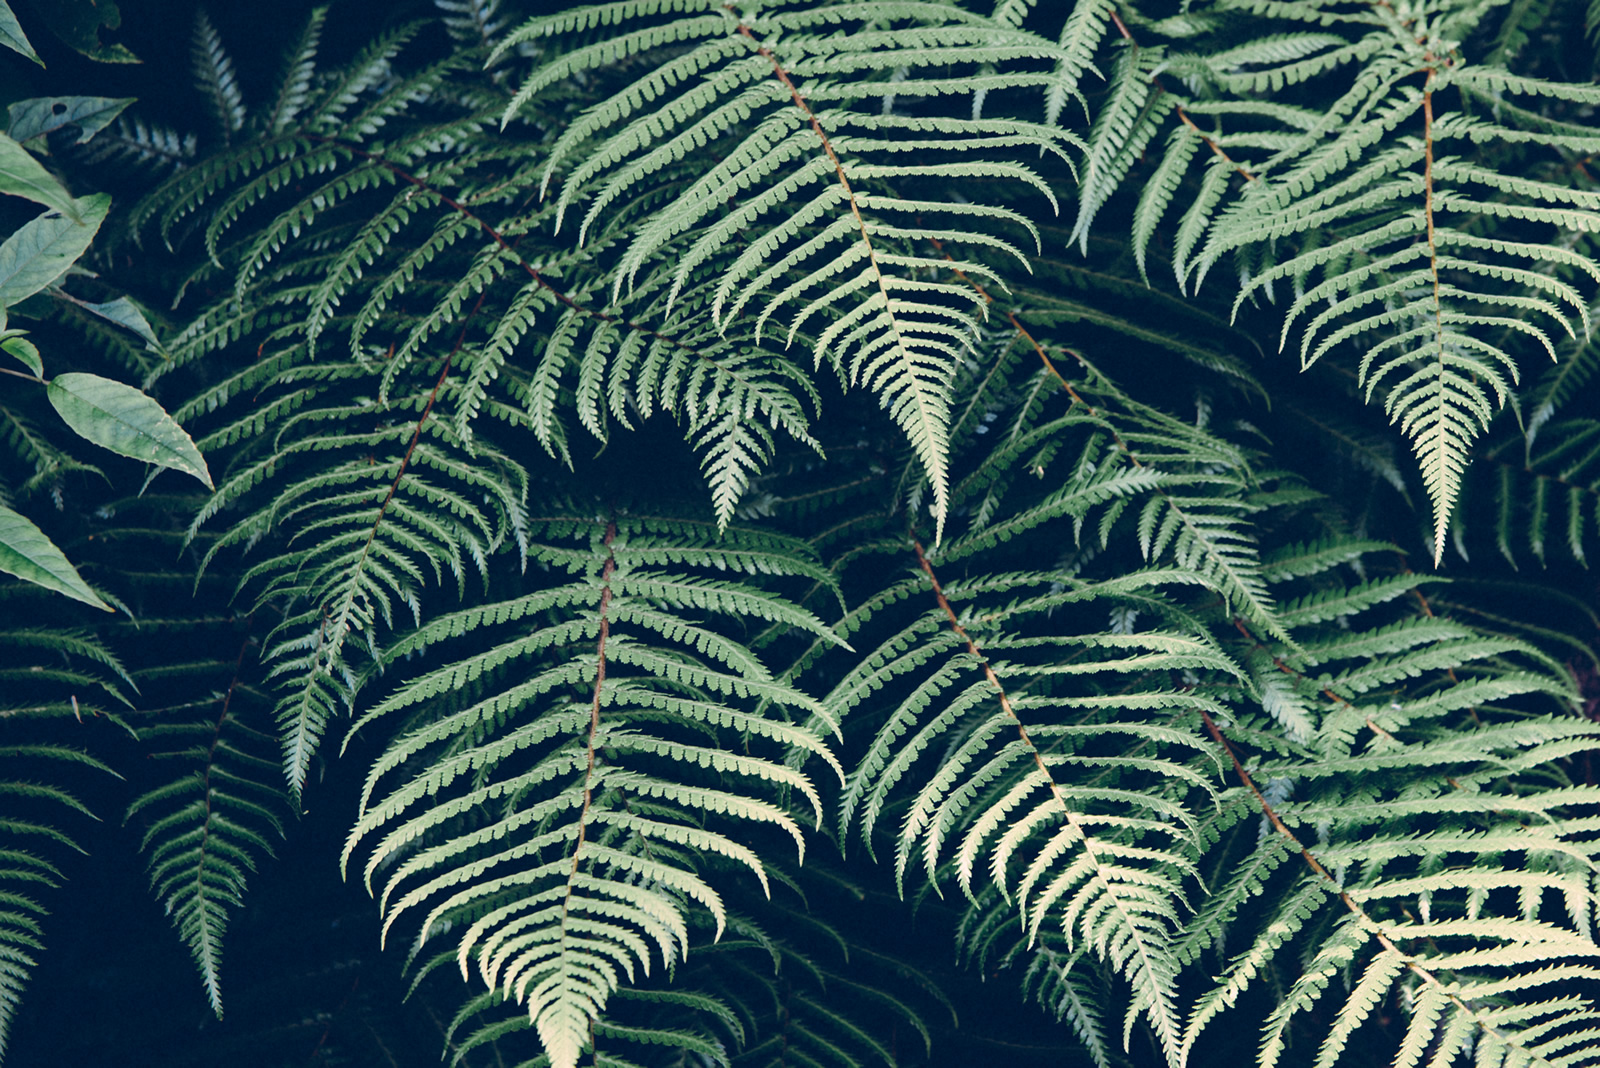 A close-up of green fern leaves